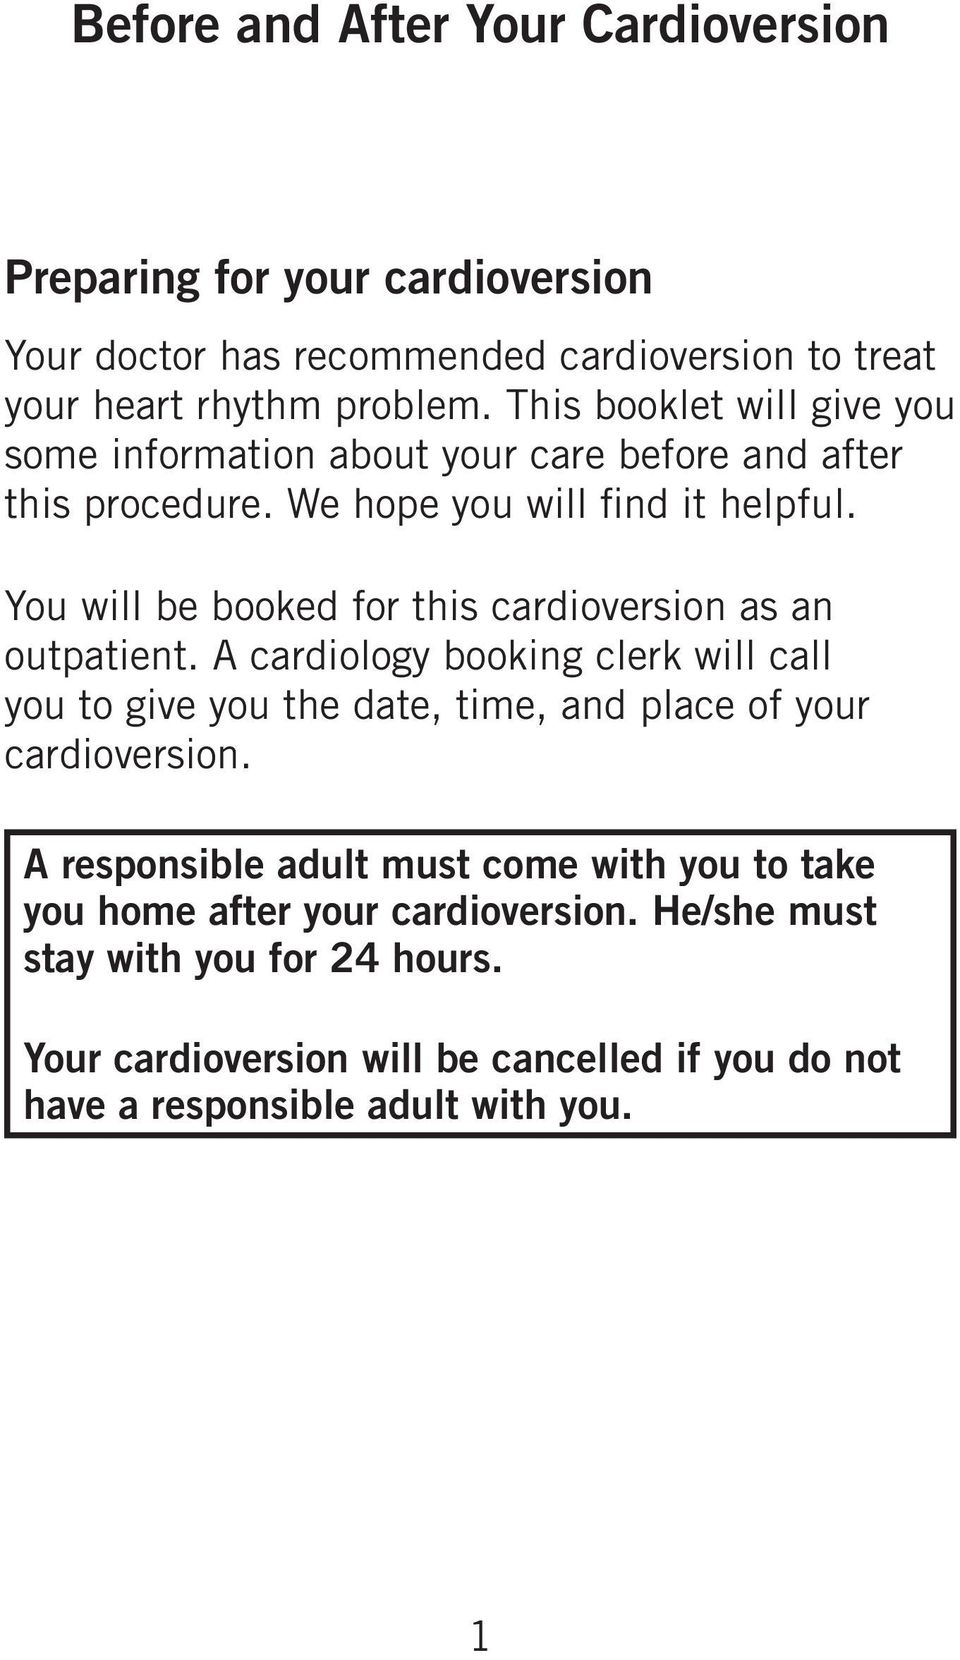 You will be booked for this cardioversion as an outpatient. A cardiology booking clerk will call you to give you the date, time, and place of your cardioversion.